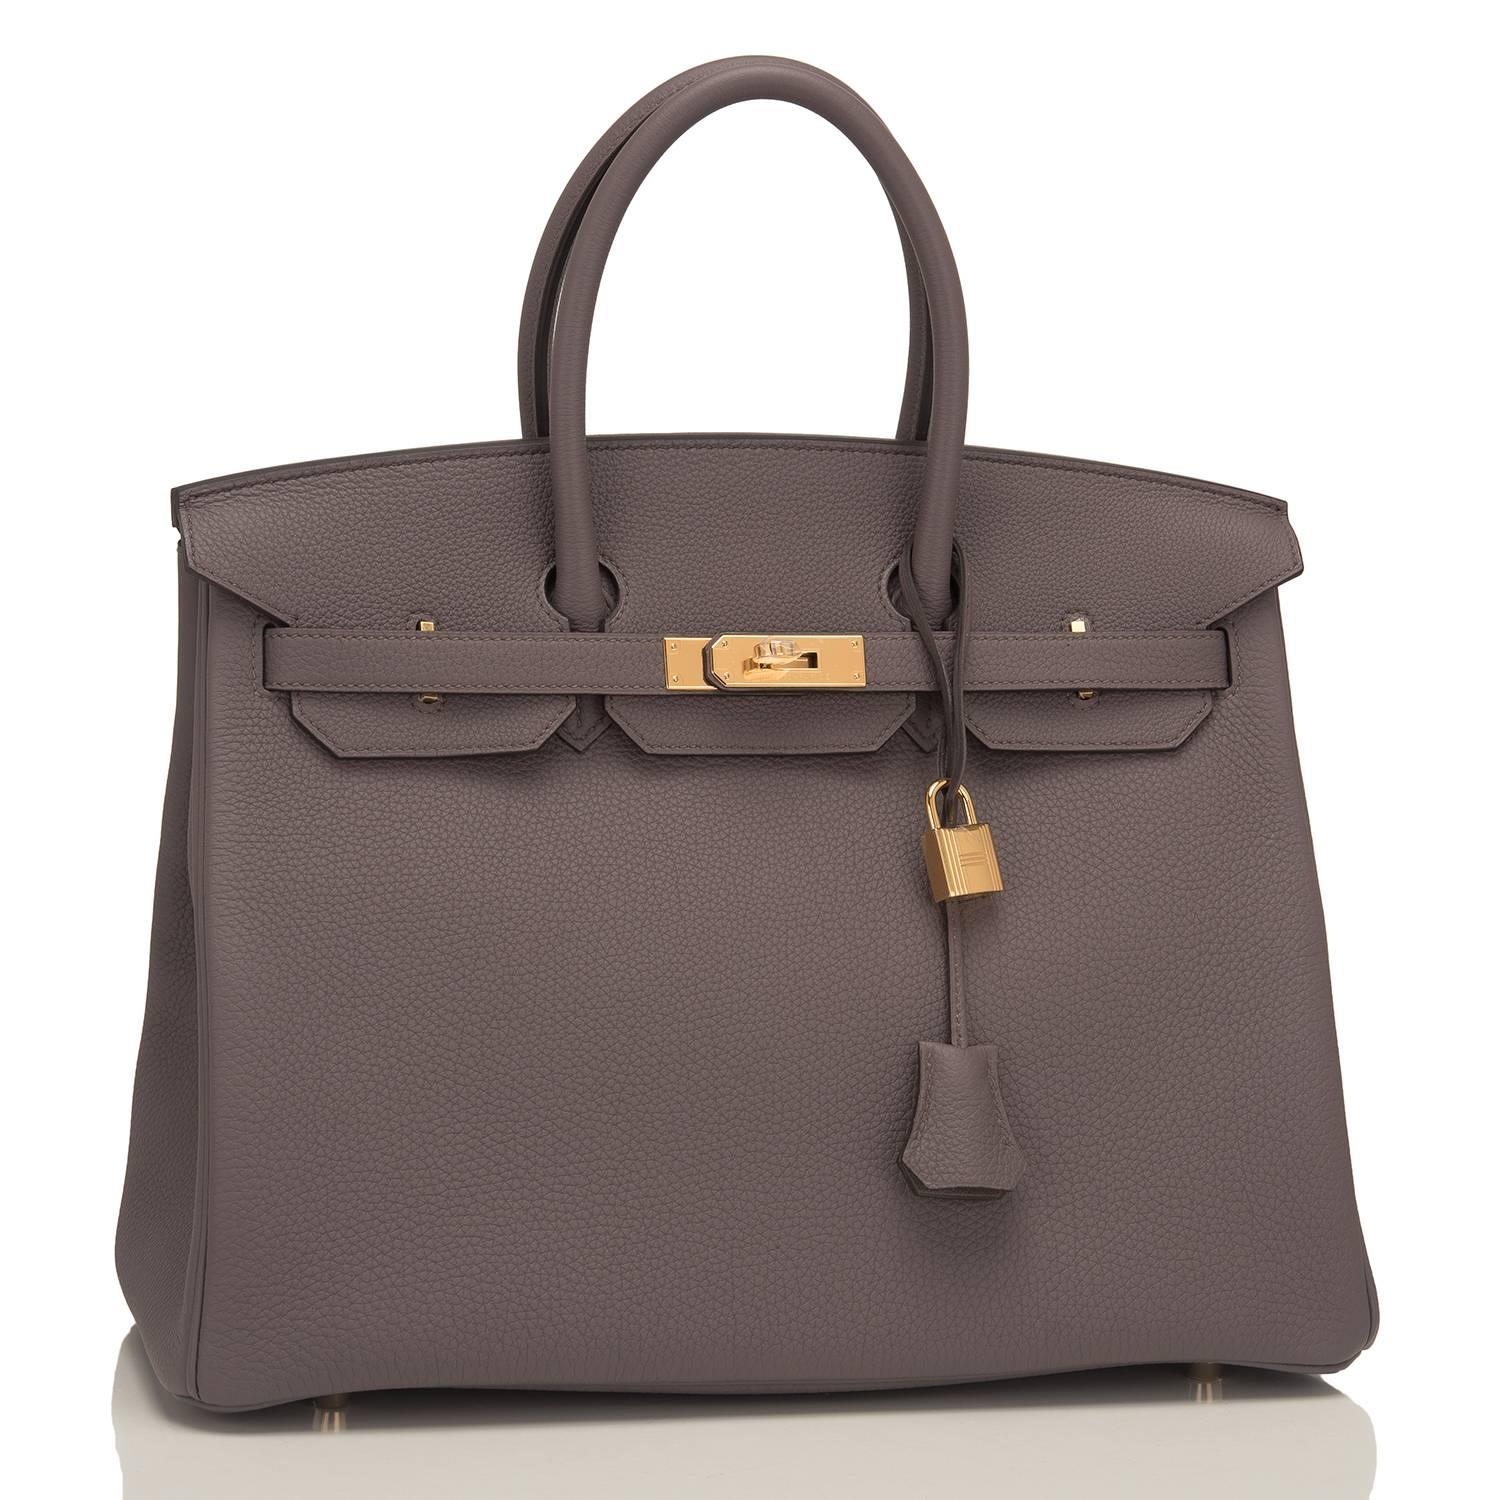 Hermes Etain 35cm of togo leather with gold hardware.

This Birkin has tonal stitching, a front toggle closure, a clochette with lock and two keys, and double rolled handles.

The interior is lined with Etain chevre and has one zip pocket with